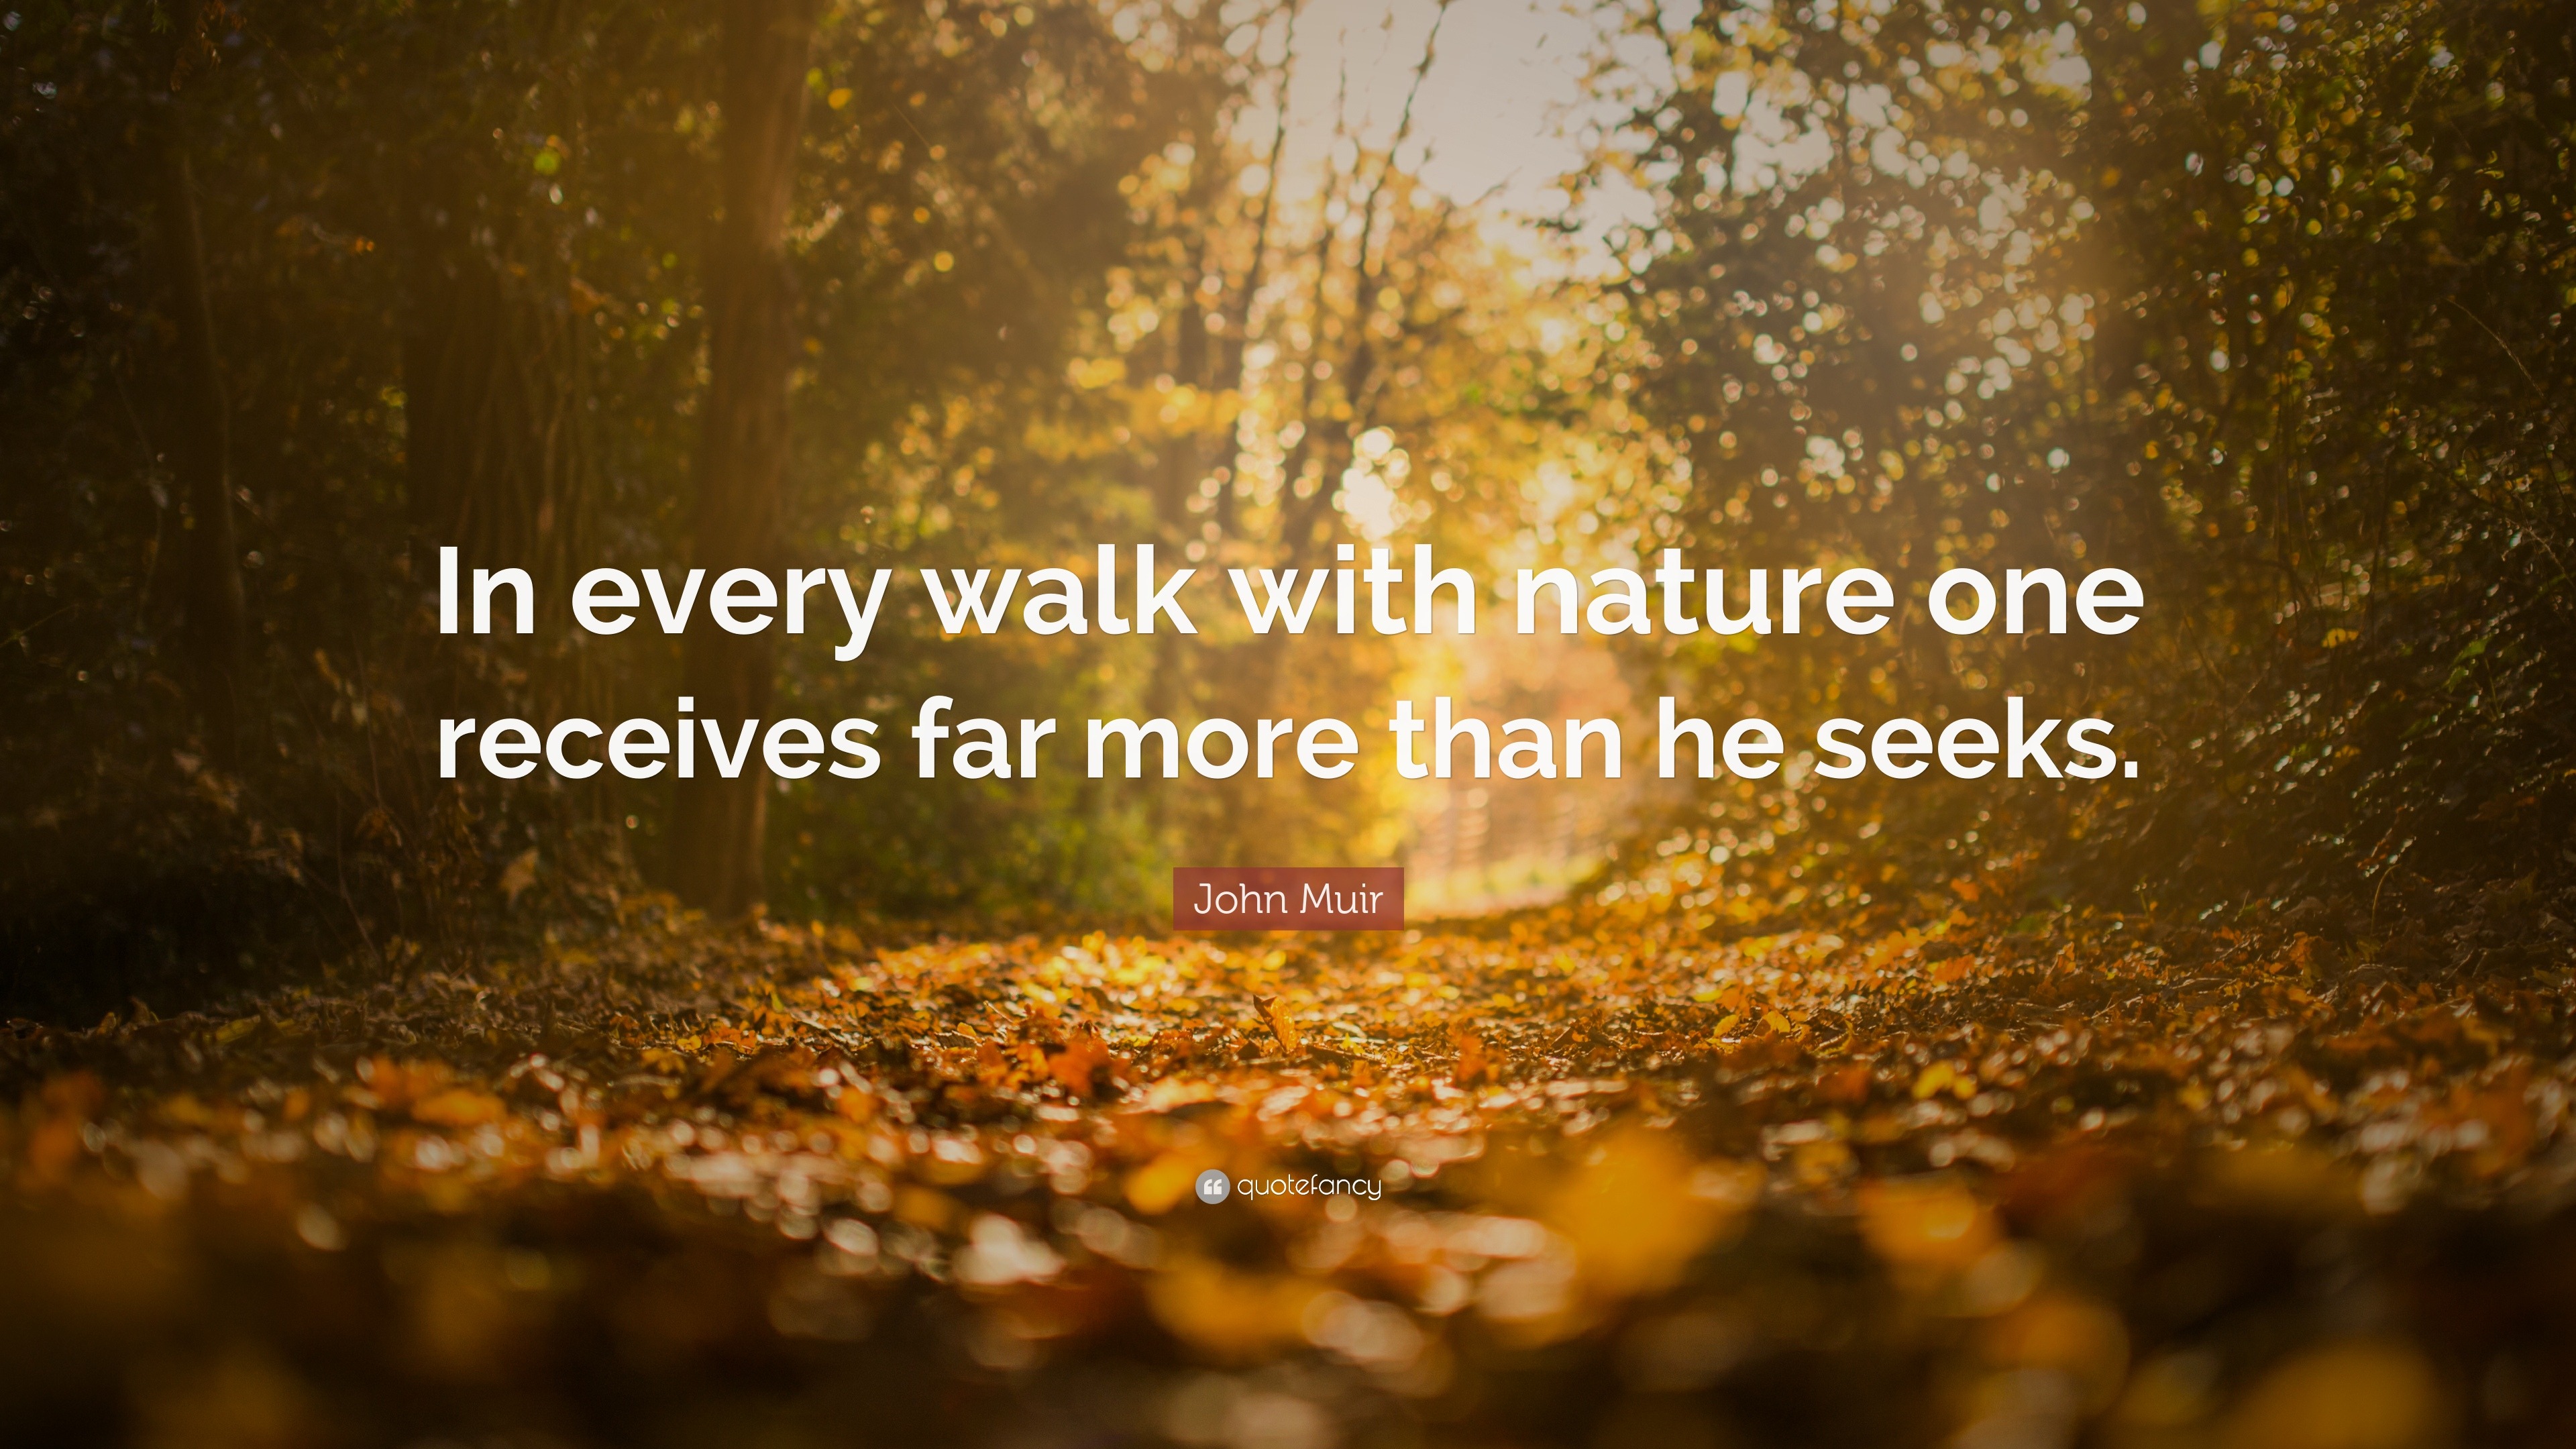 John Muir Quote: “In every walk with nature one receives far more than